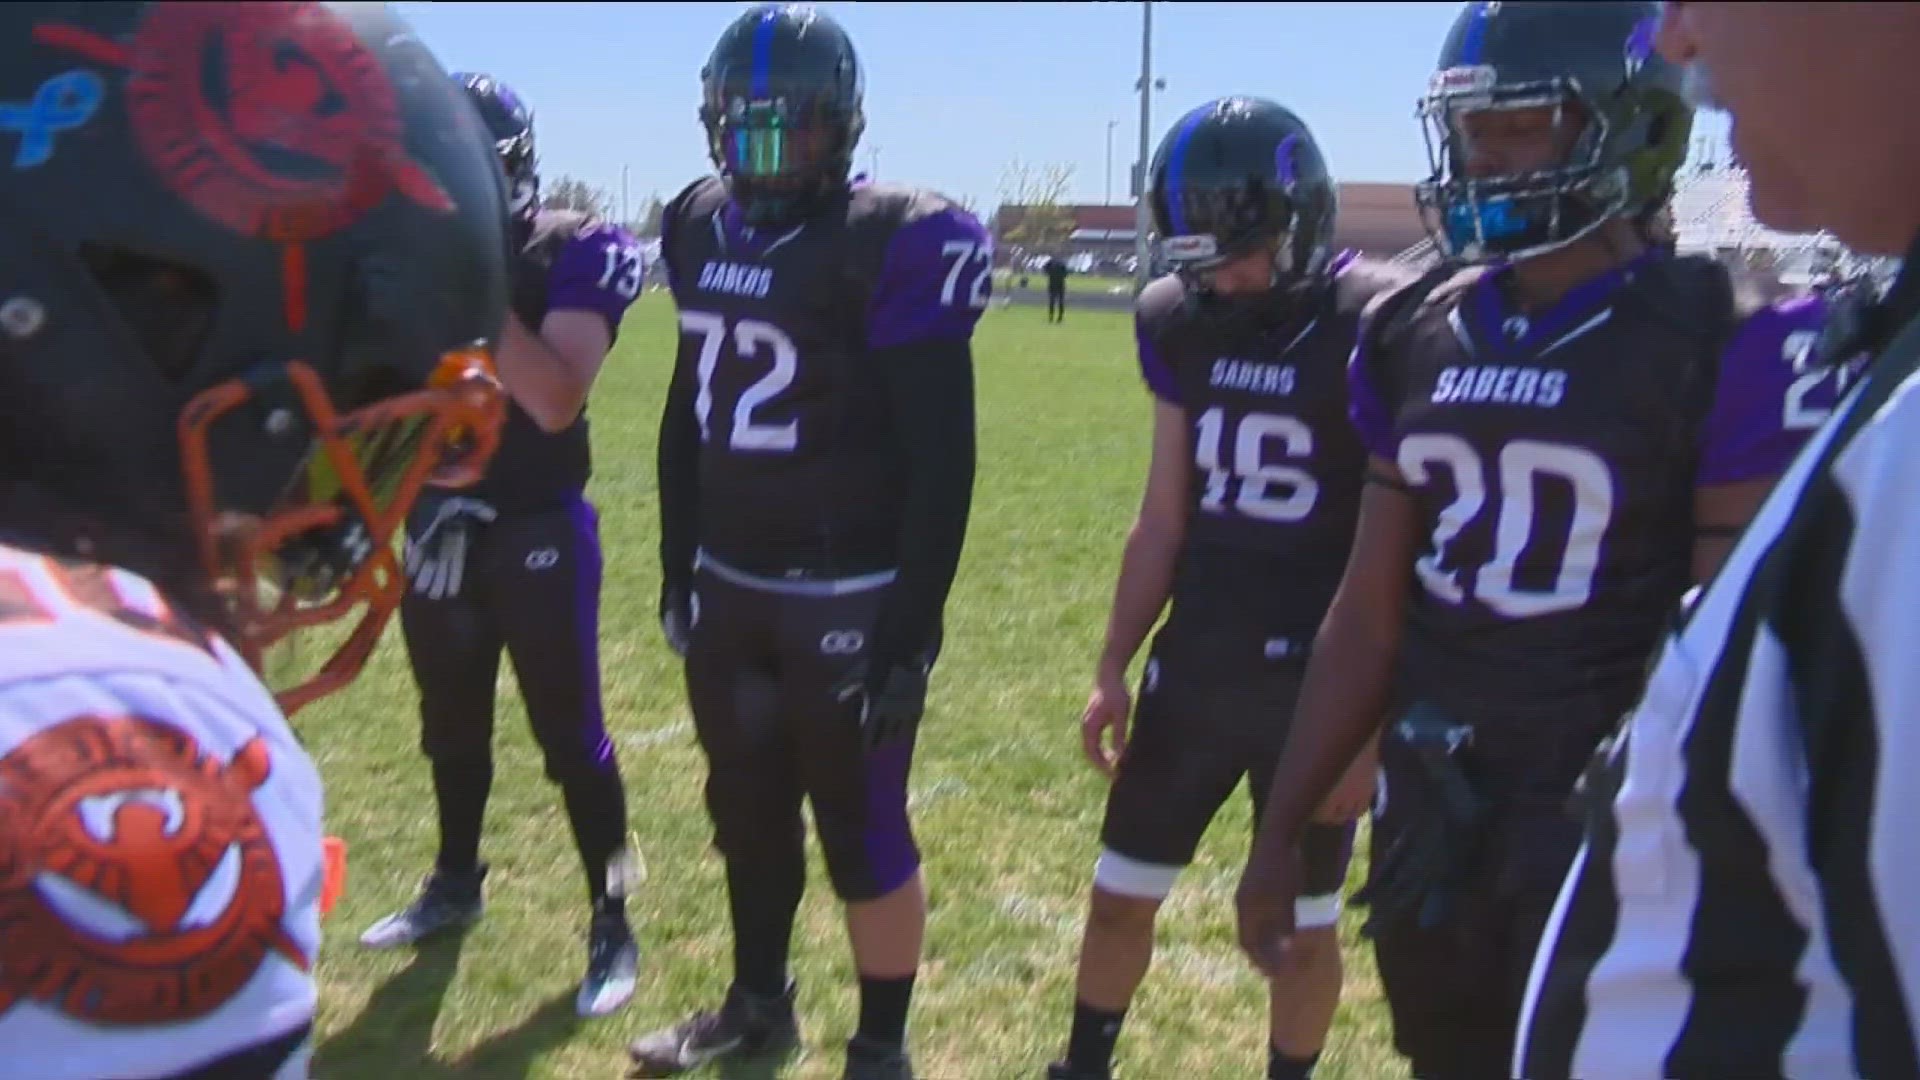 The Idaho Sabers are in their first season in the ICFL, an organization giving players another opportunity to continue their love for football.